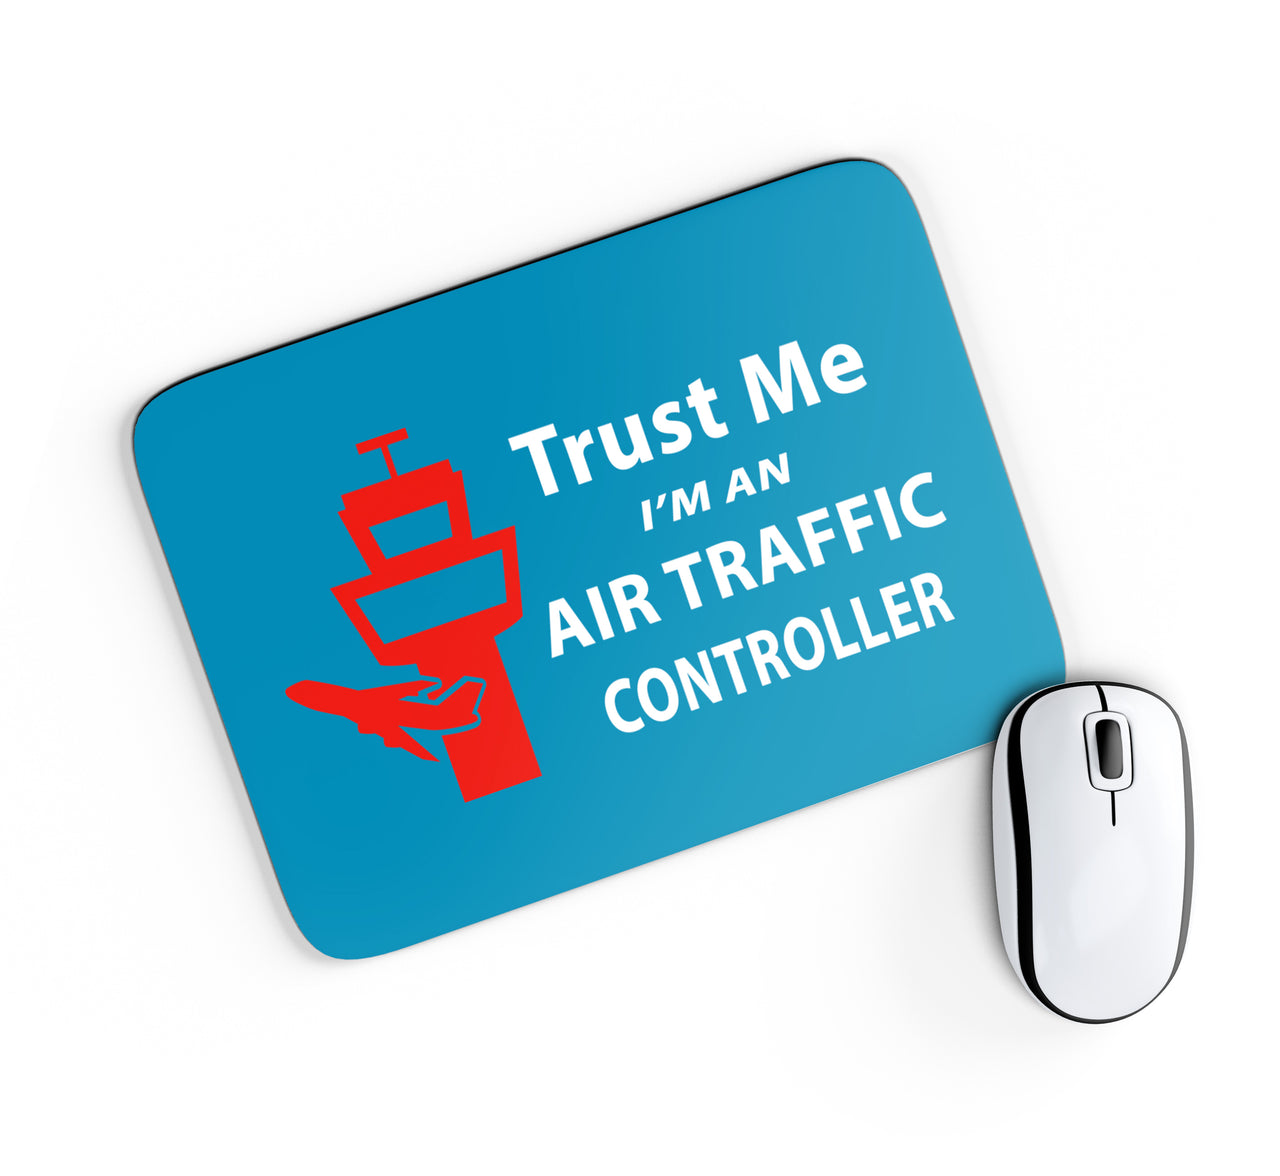 Trust Me I'm an Air Traffic Controller Designed Mouse Pads